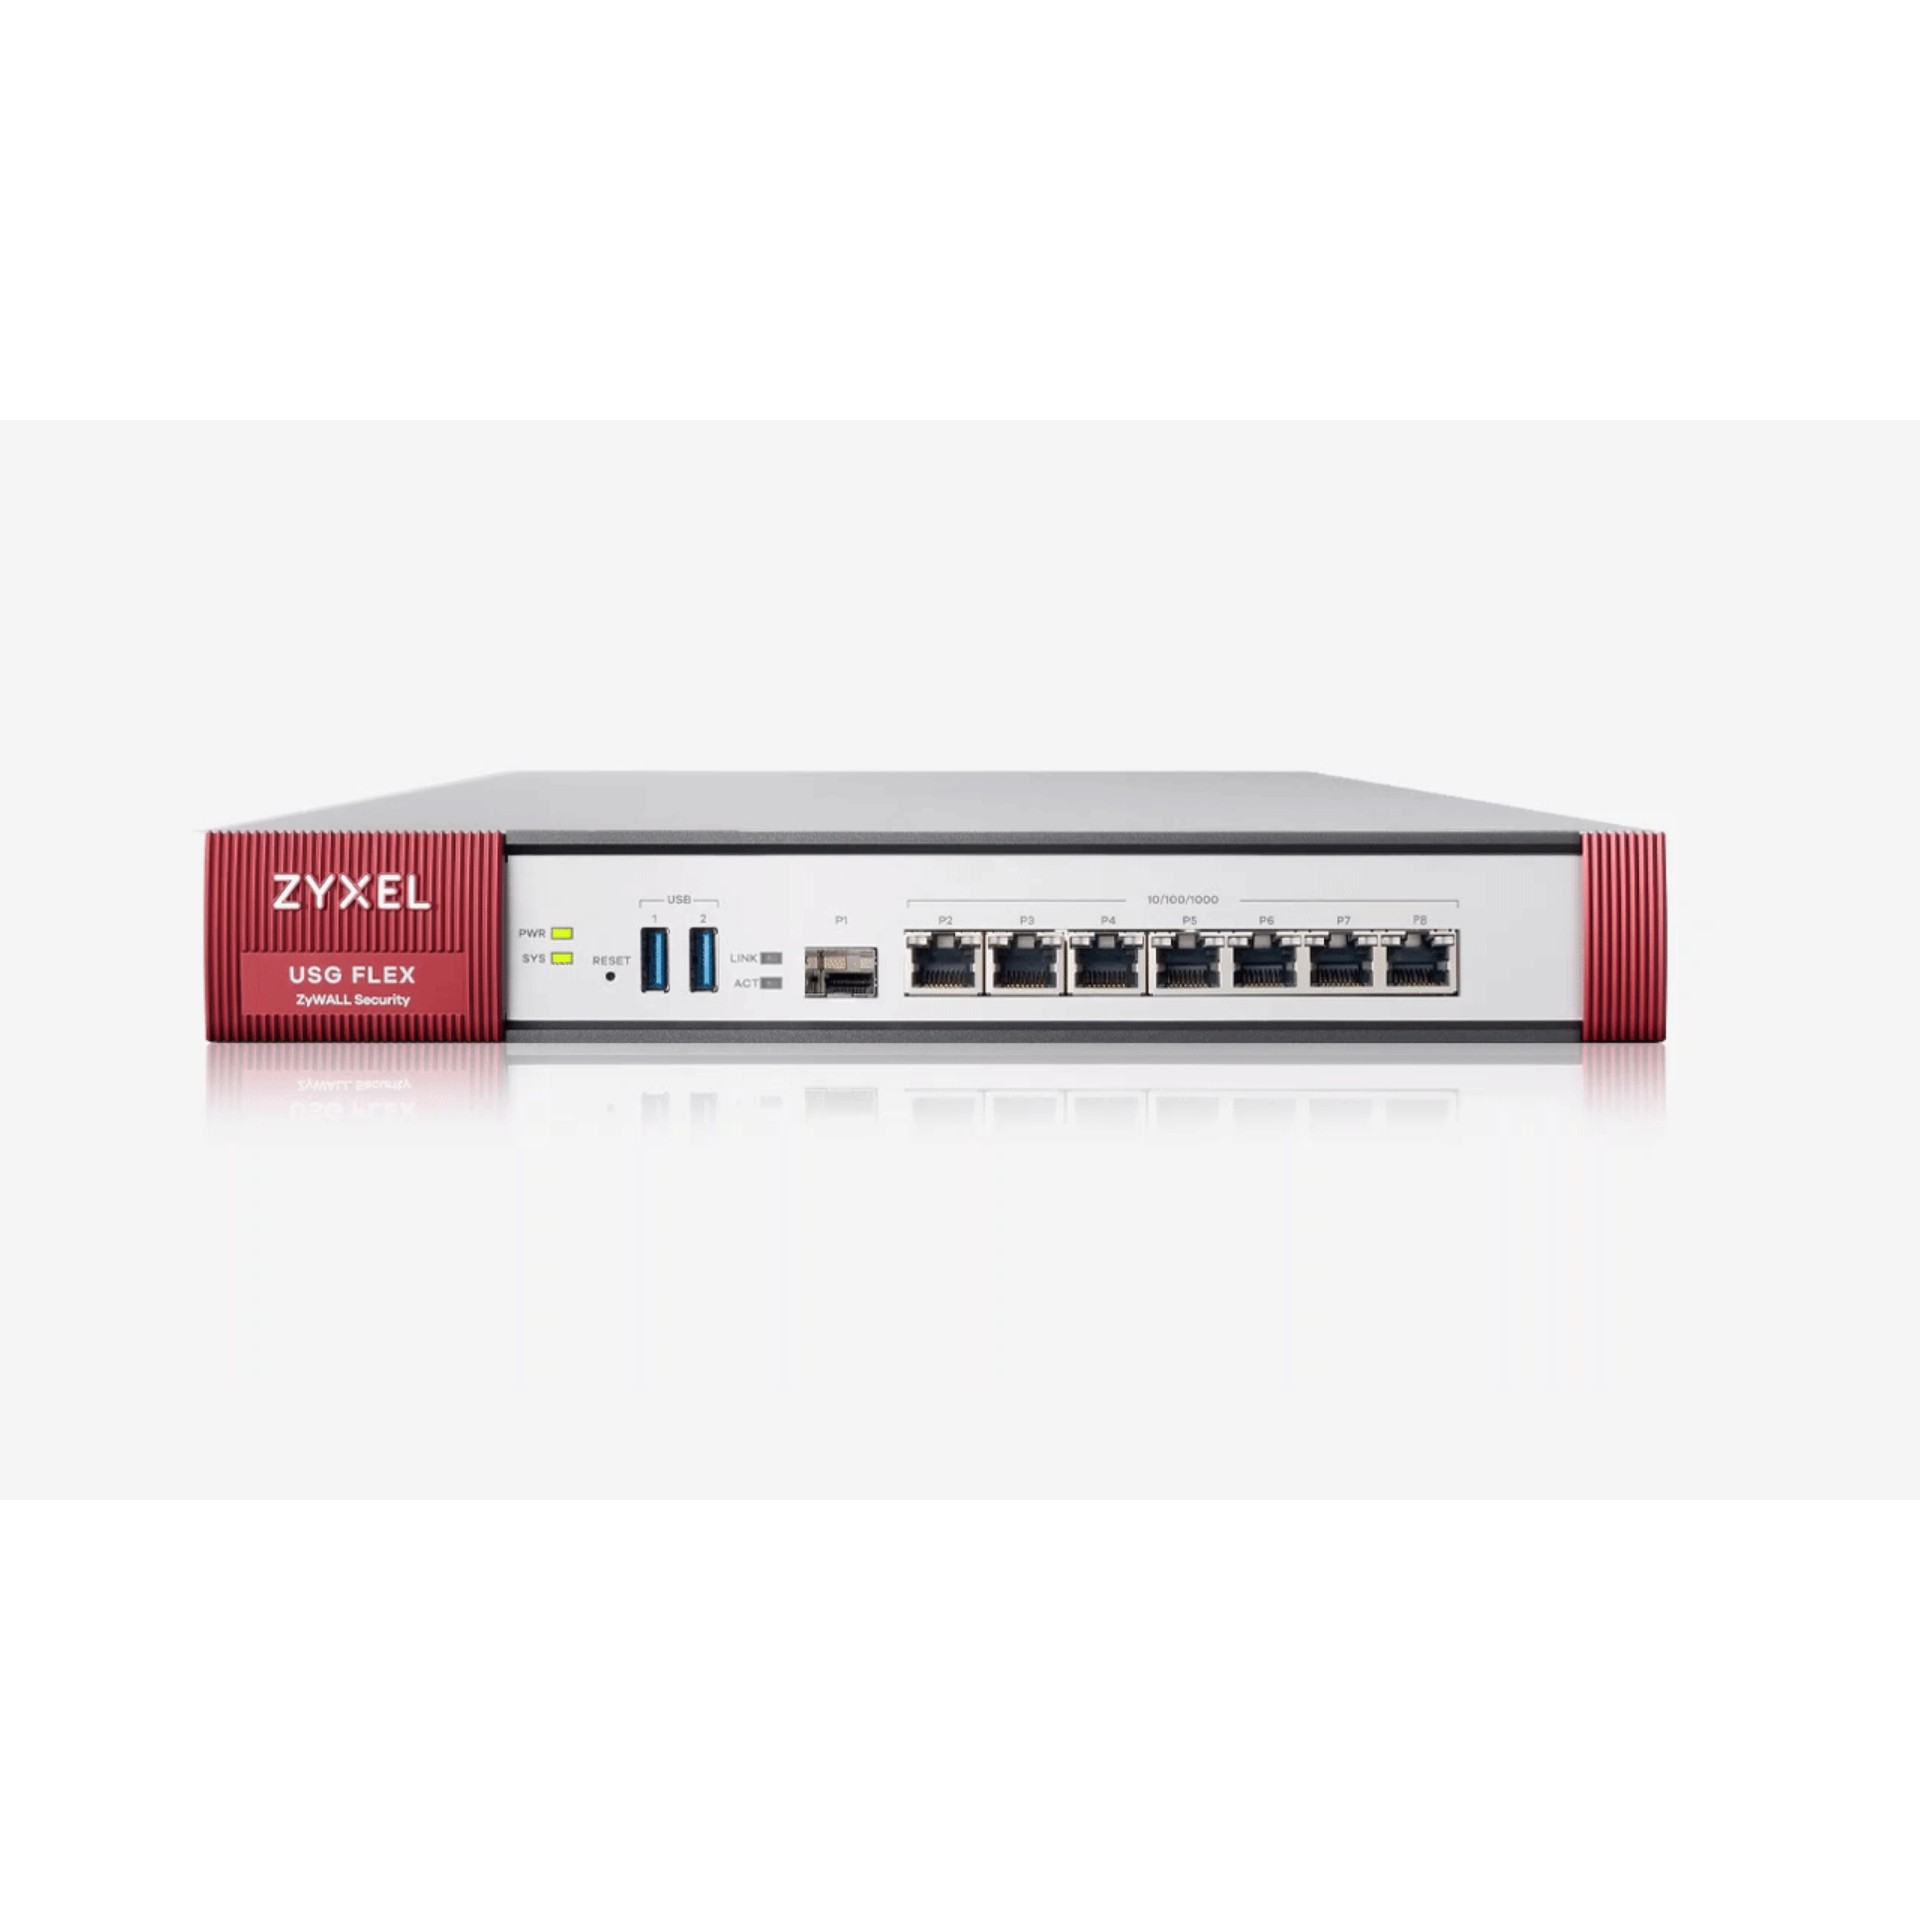 ZYXEL Router USG FLEX 200 (Device only) Firewall